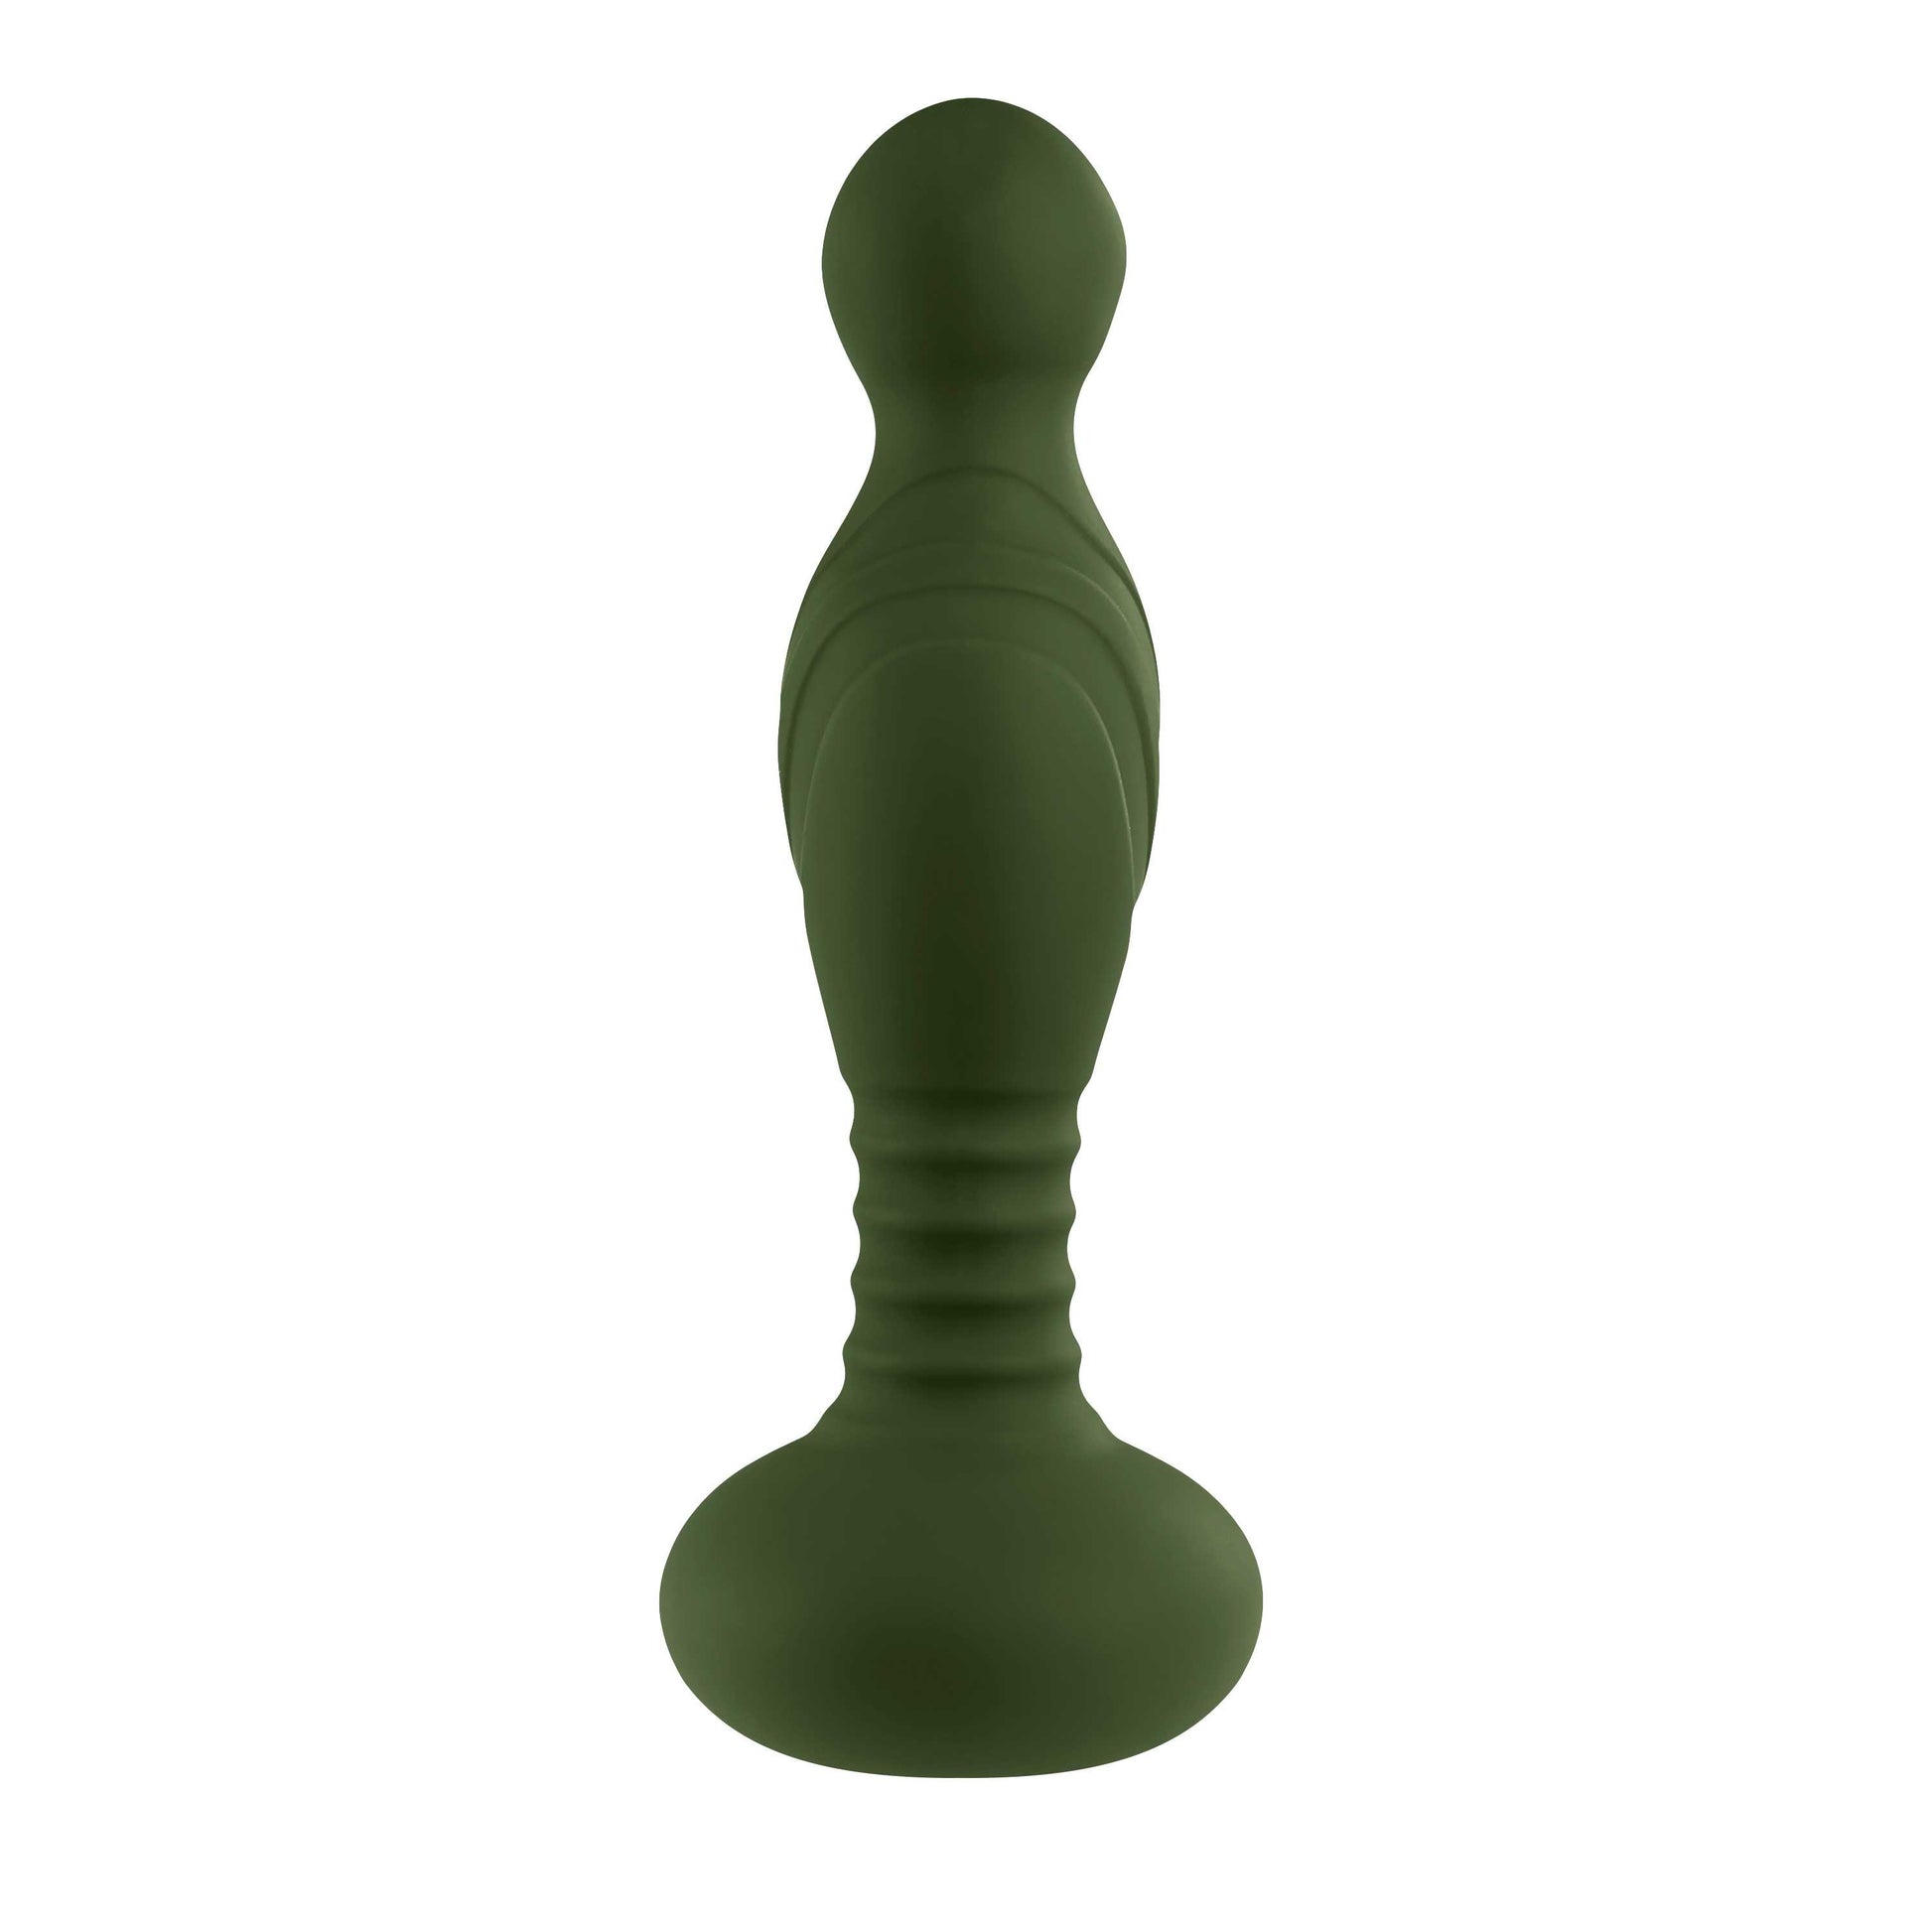 The General - Green - My Sex Toy Hub